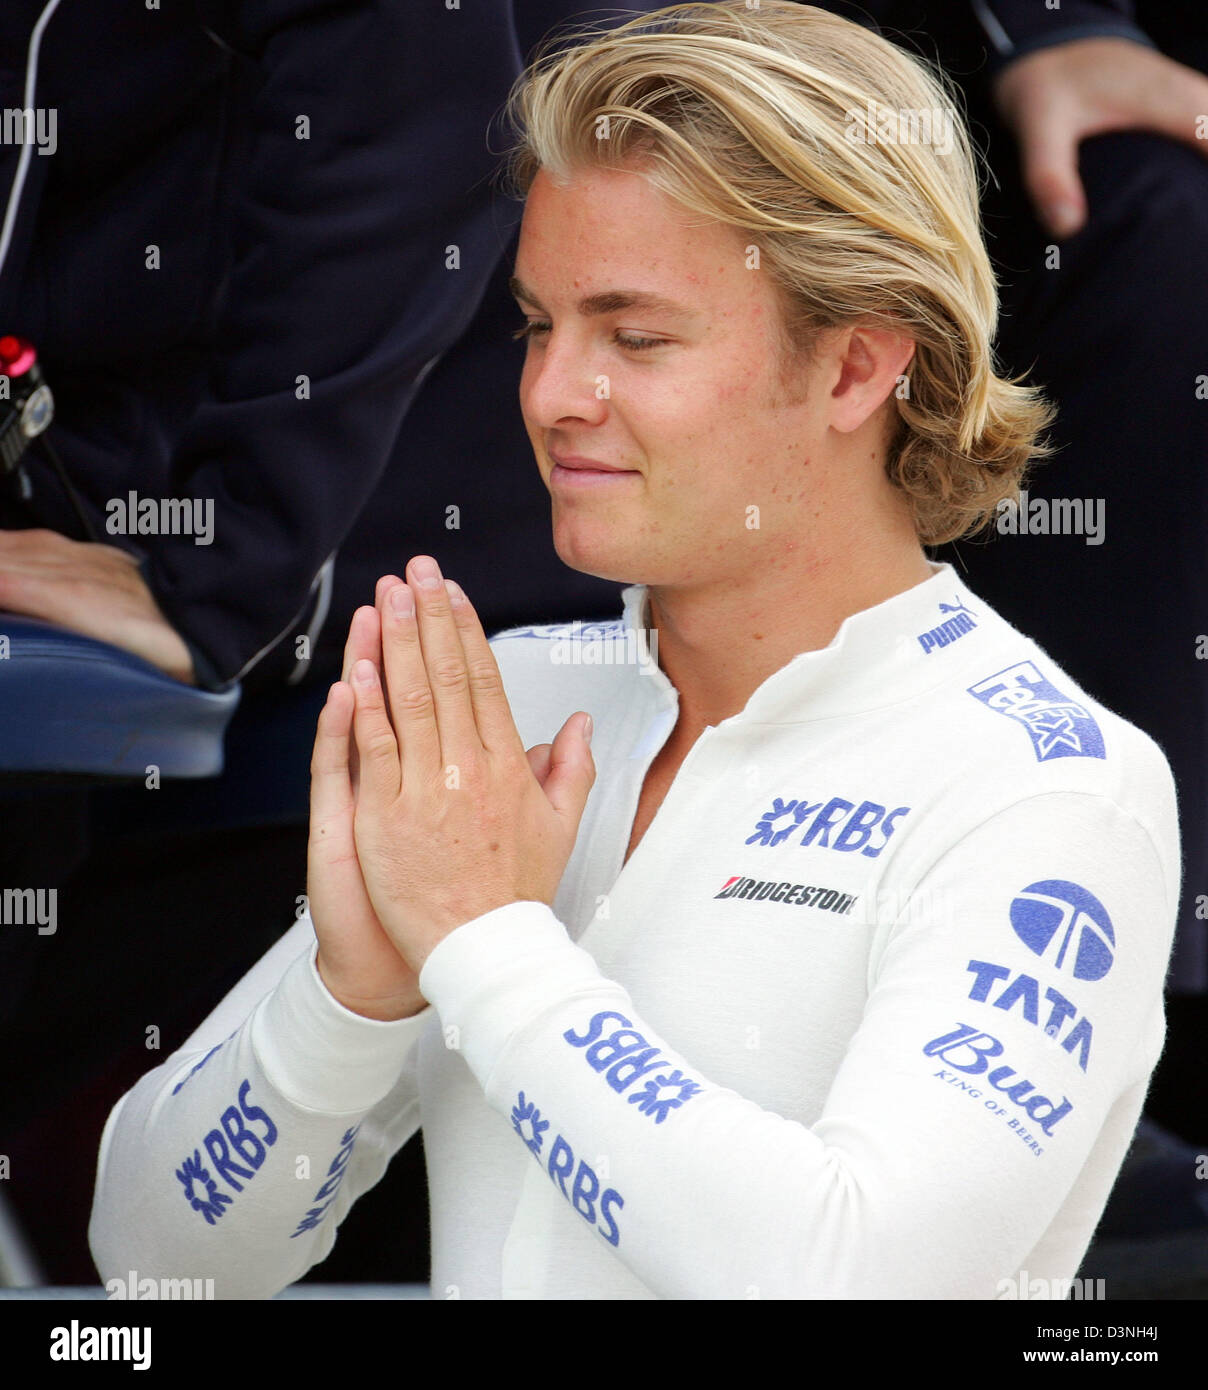 German Formula One pilot Nico Roseberg of Williams F1 team meditates during the third practice session to the 2006 FORMULA 1 Grand Prix of Spain at the race track Circuit de Catalunya in Montmelo near Barcelona, Spain, Saturday, 13 May 2006. The 2006 FORMULA 1 Grand Prix of Spain takes place on Sunday, 14 May. Photo: Gero Breloer Stock Photo